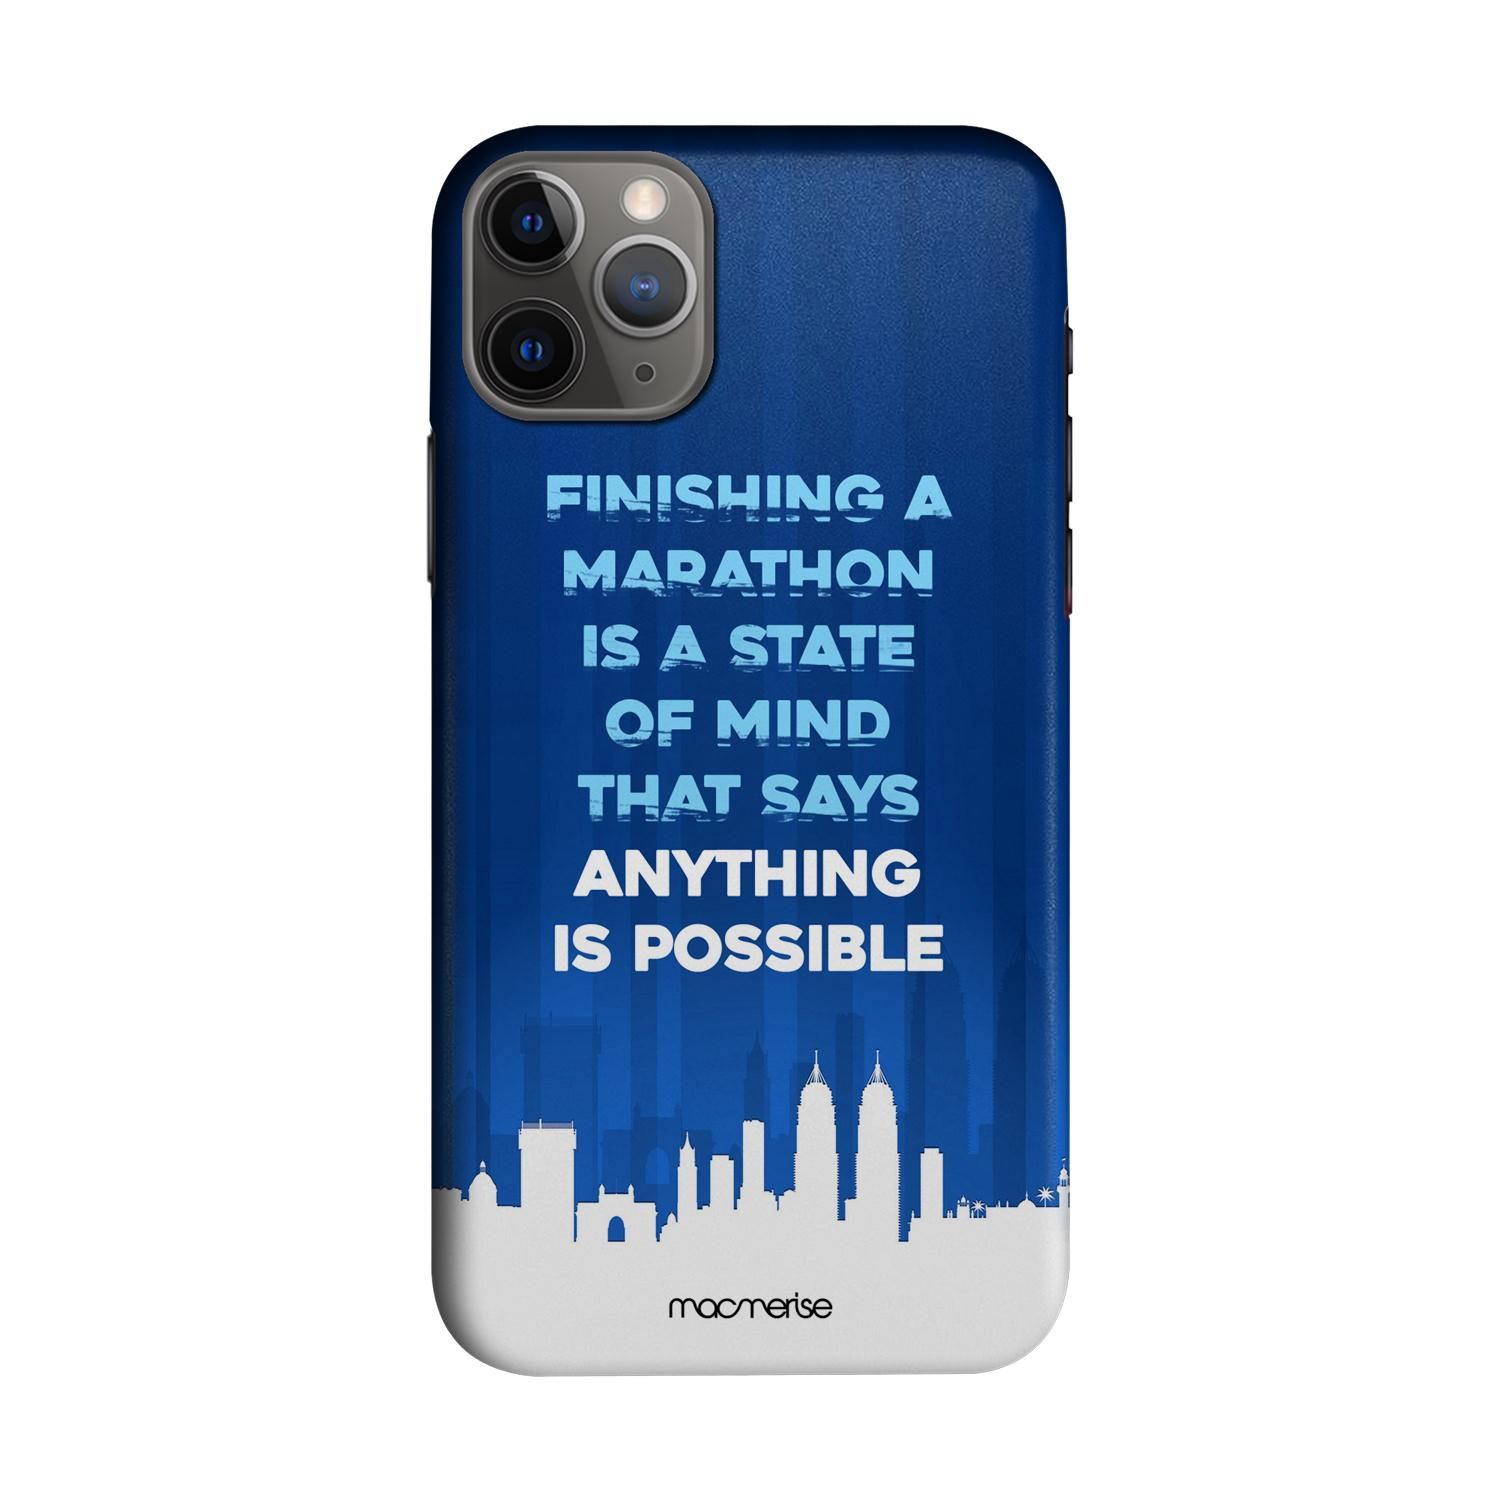 Buy Anything Is Possible - Sleek Phone Case for iPhone 11 Pro Max Online